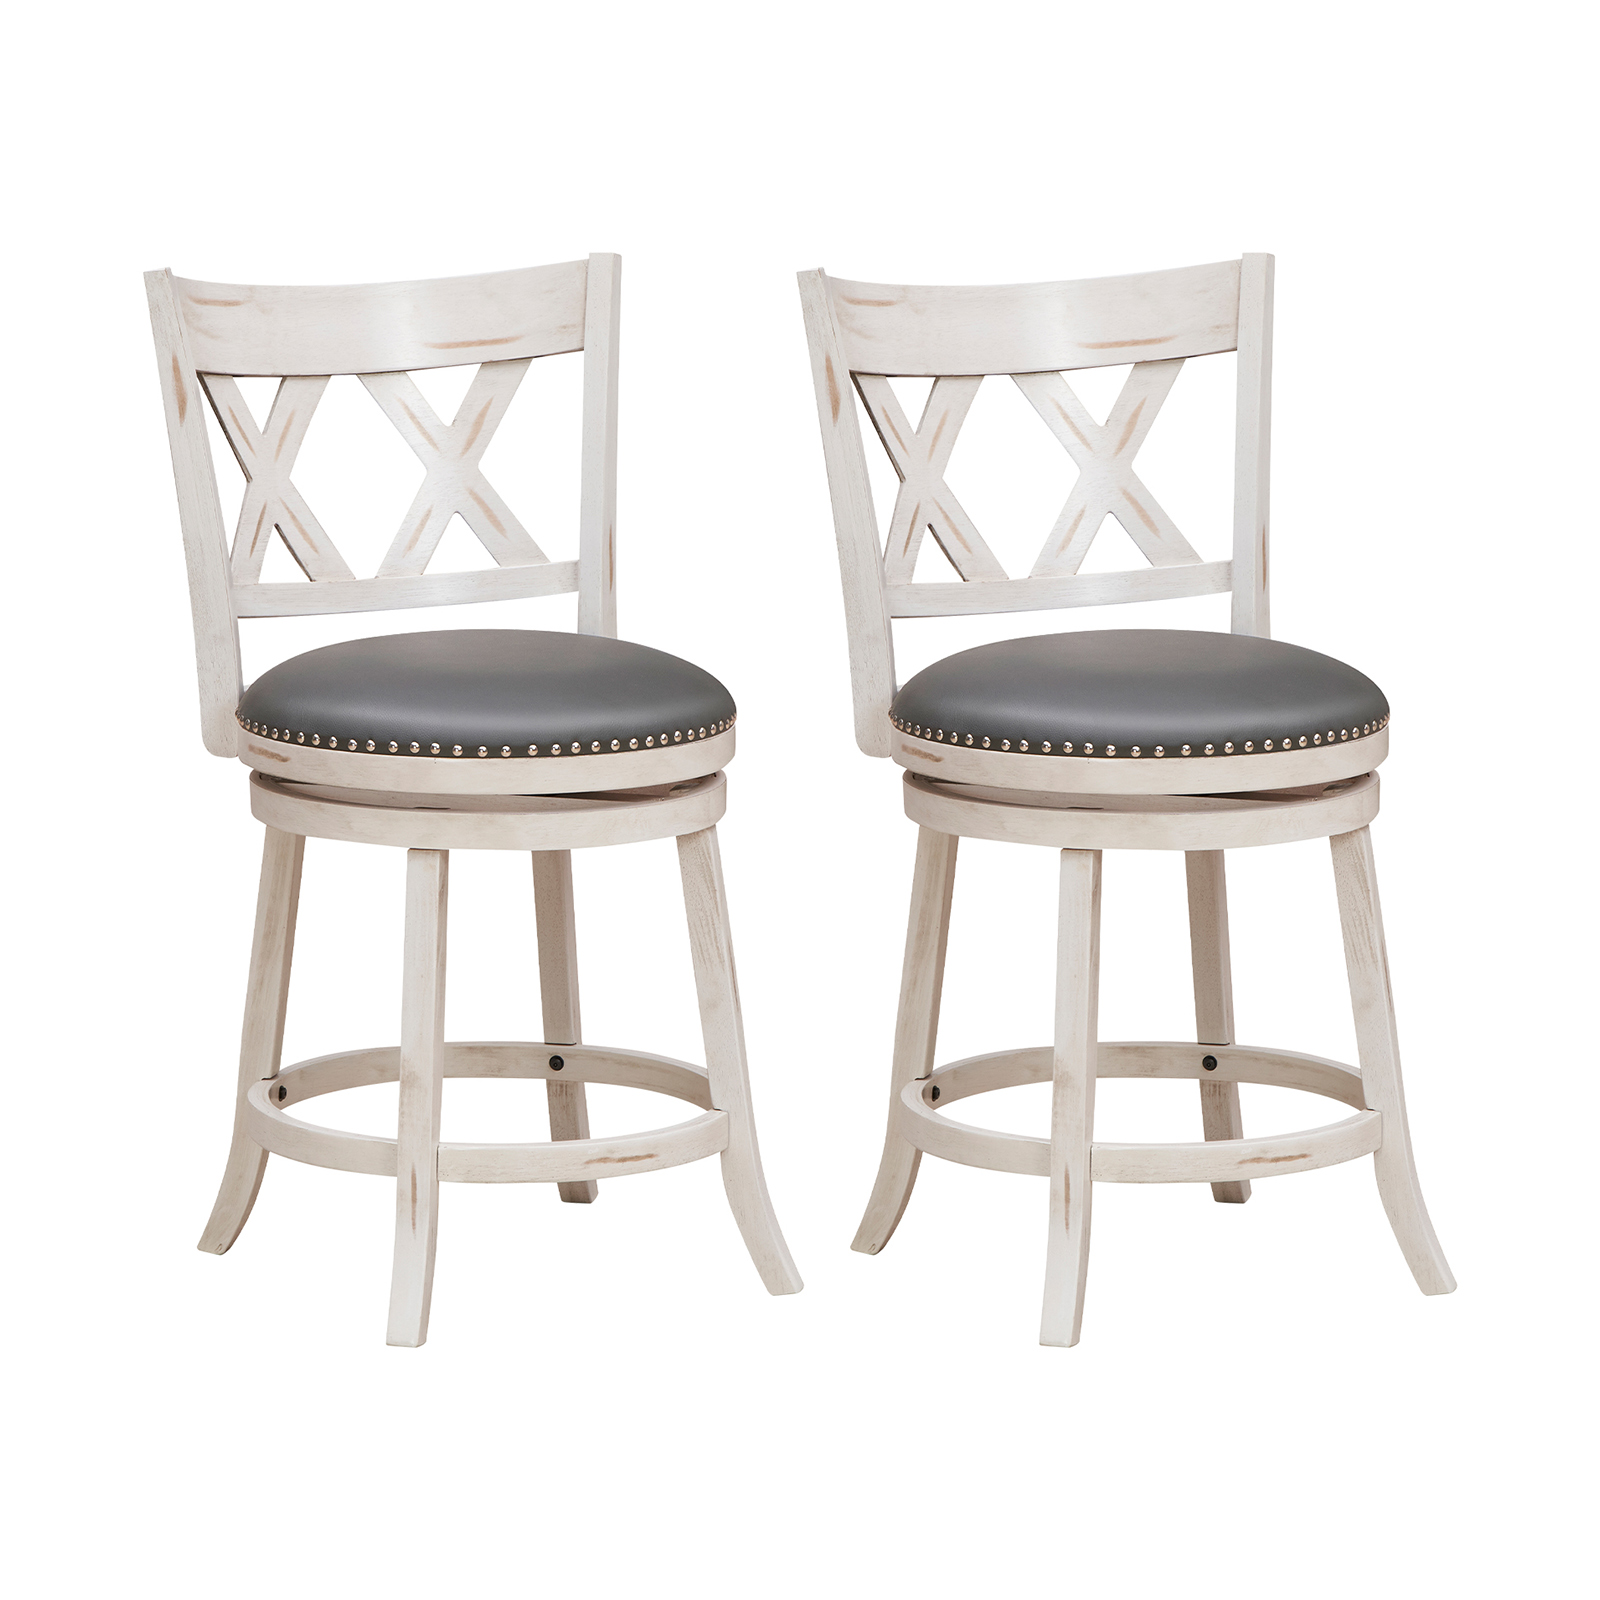 Swivel 64cm Hand-Antiqued Stool Set of 2 with Wider Padded Seat-White-64 cm